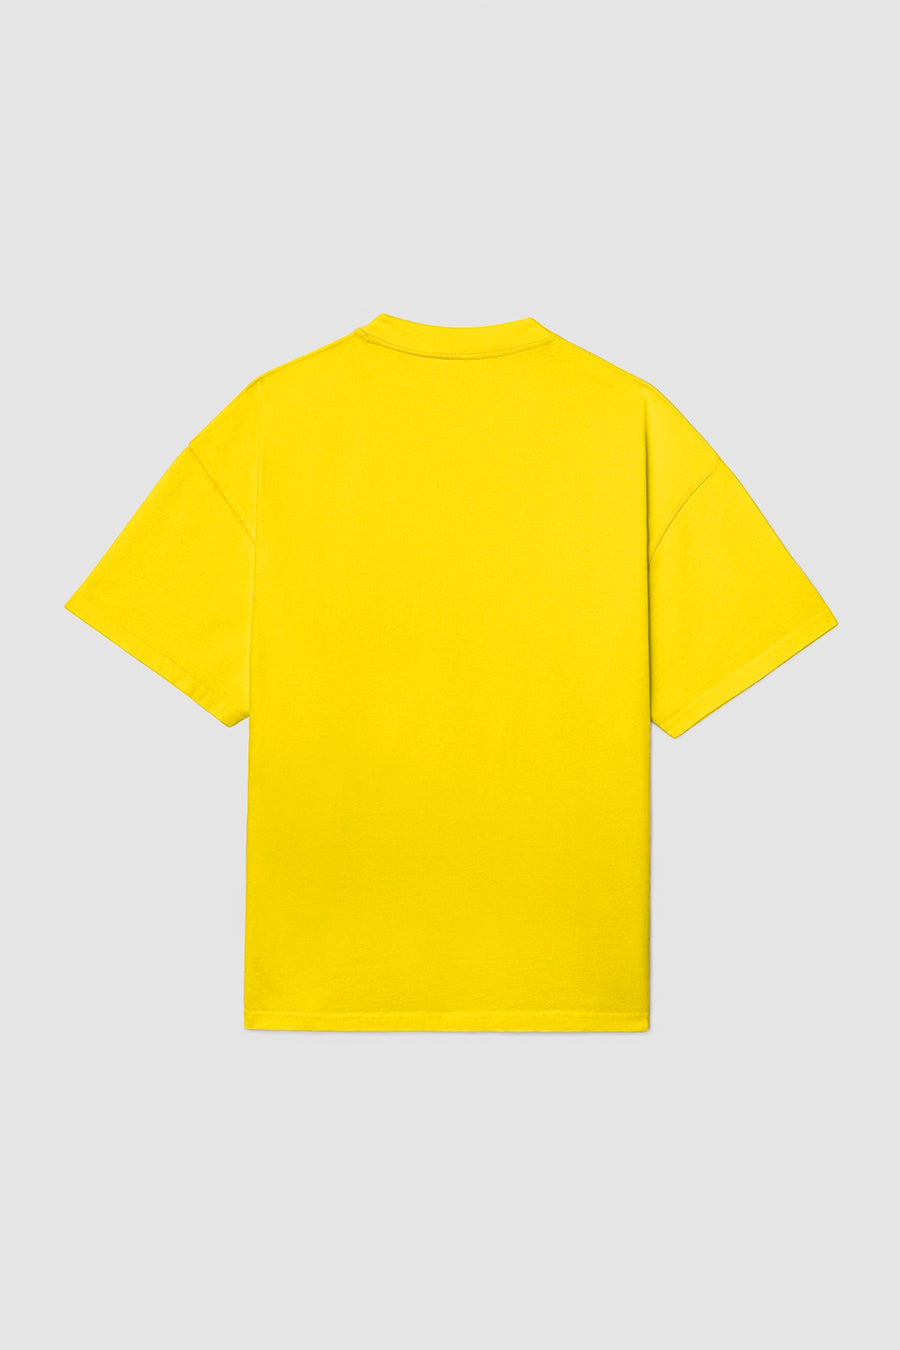 Yellow T-Shirt - only available in wholesale